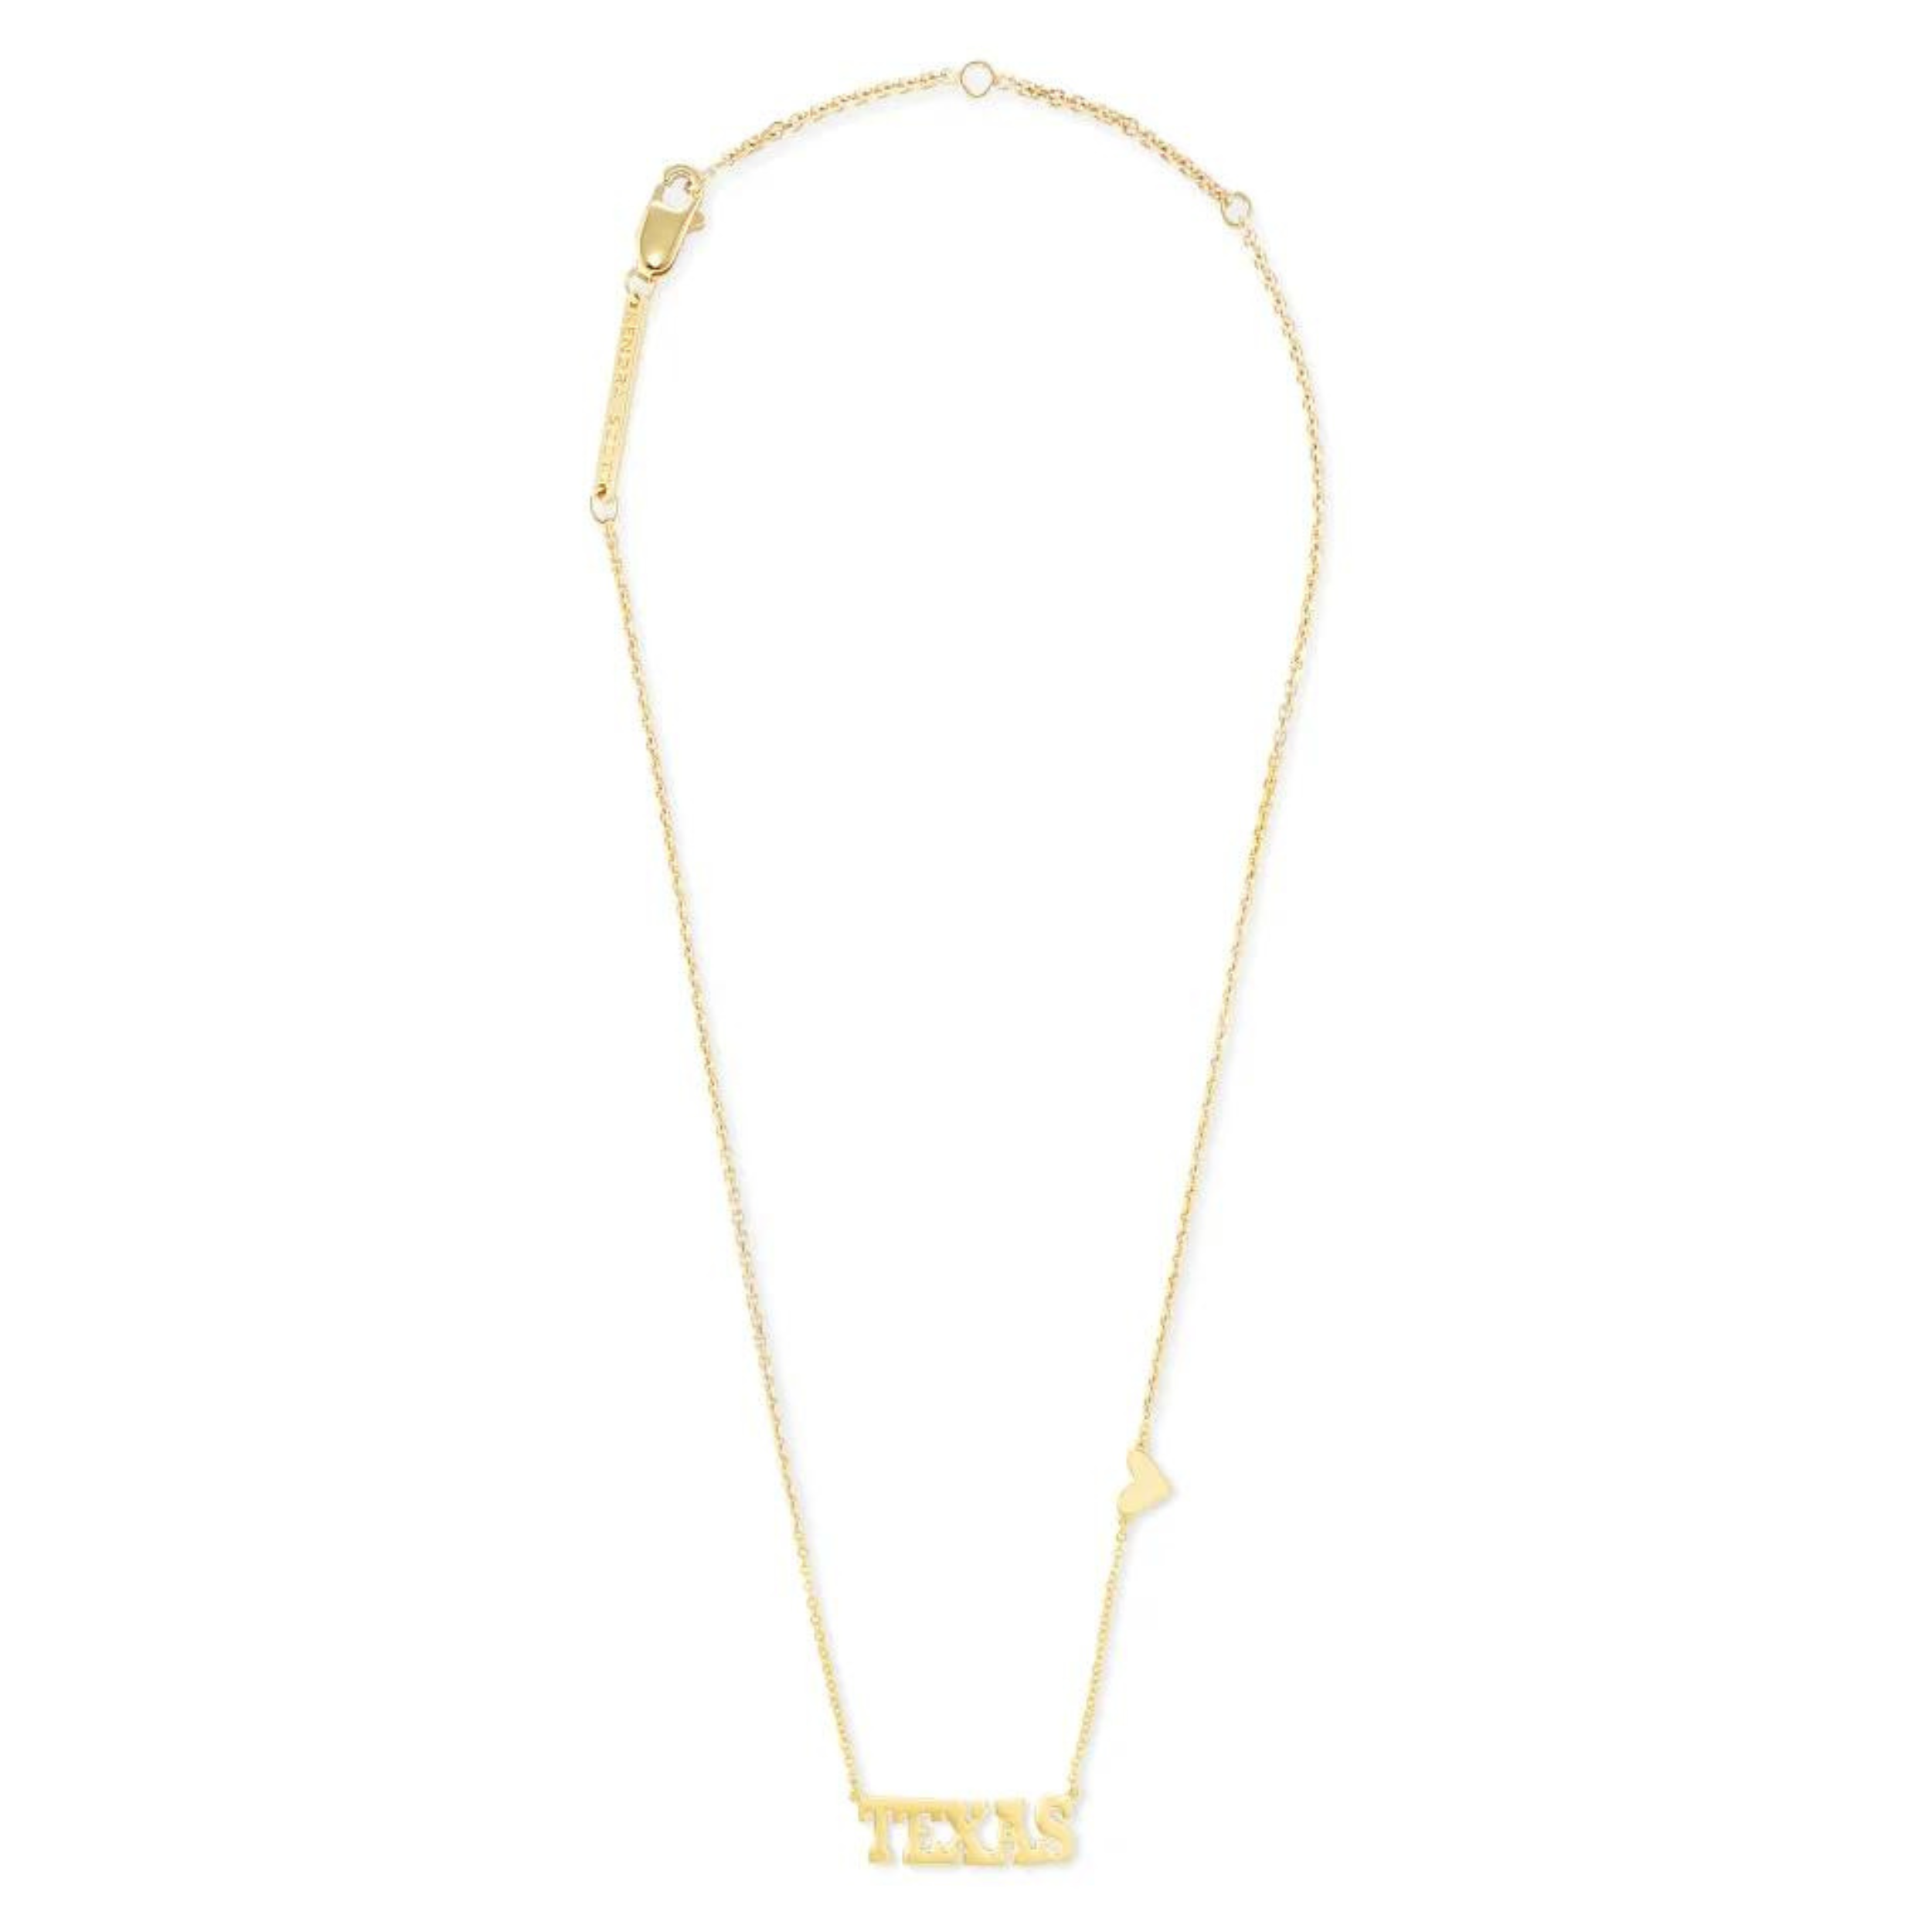 Kendra Scott | Texas Pendant Necklace in 18k Gold Vermeil - Giddy Up Glamour Boutique